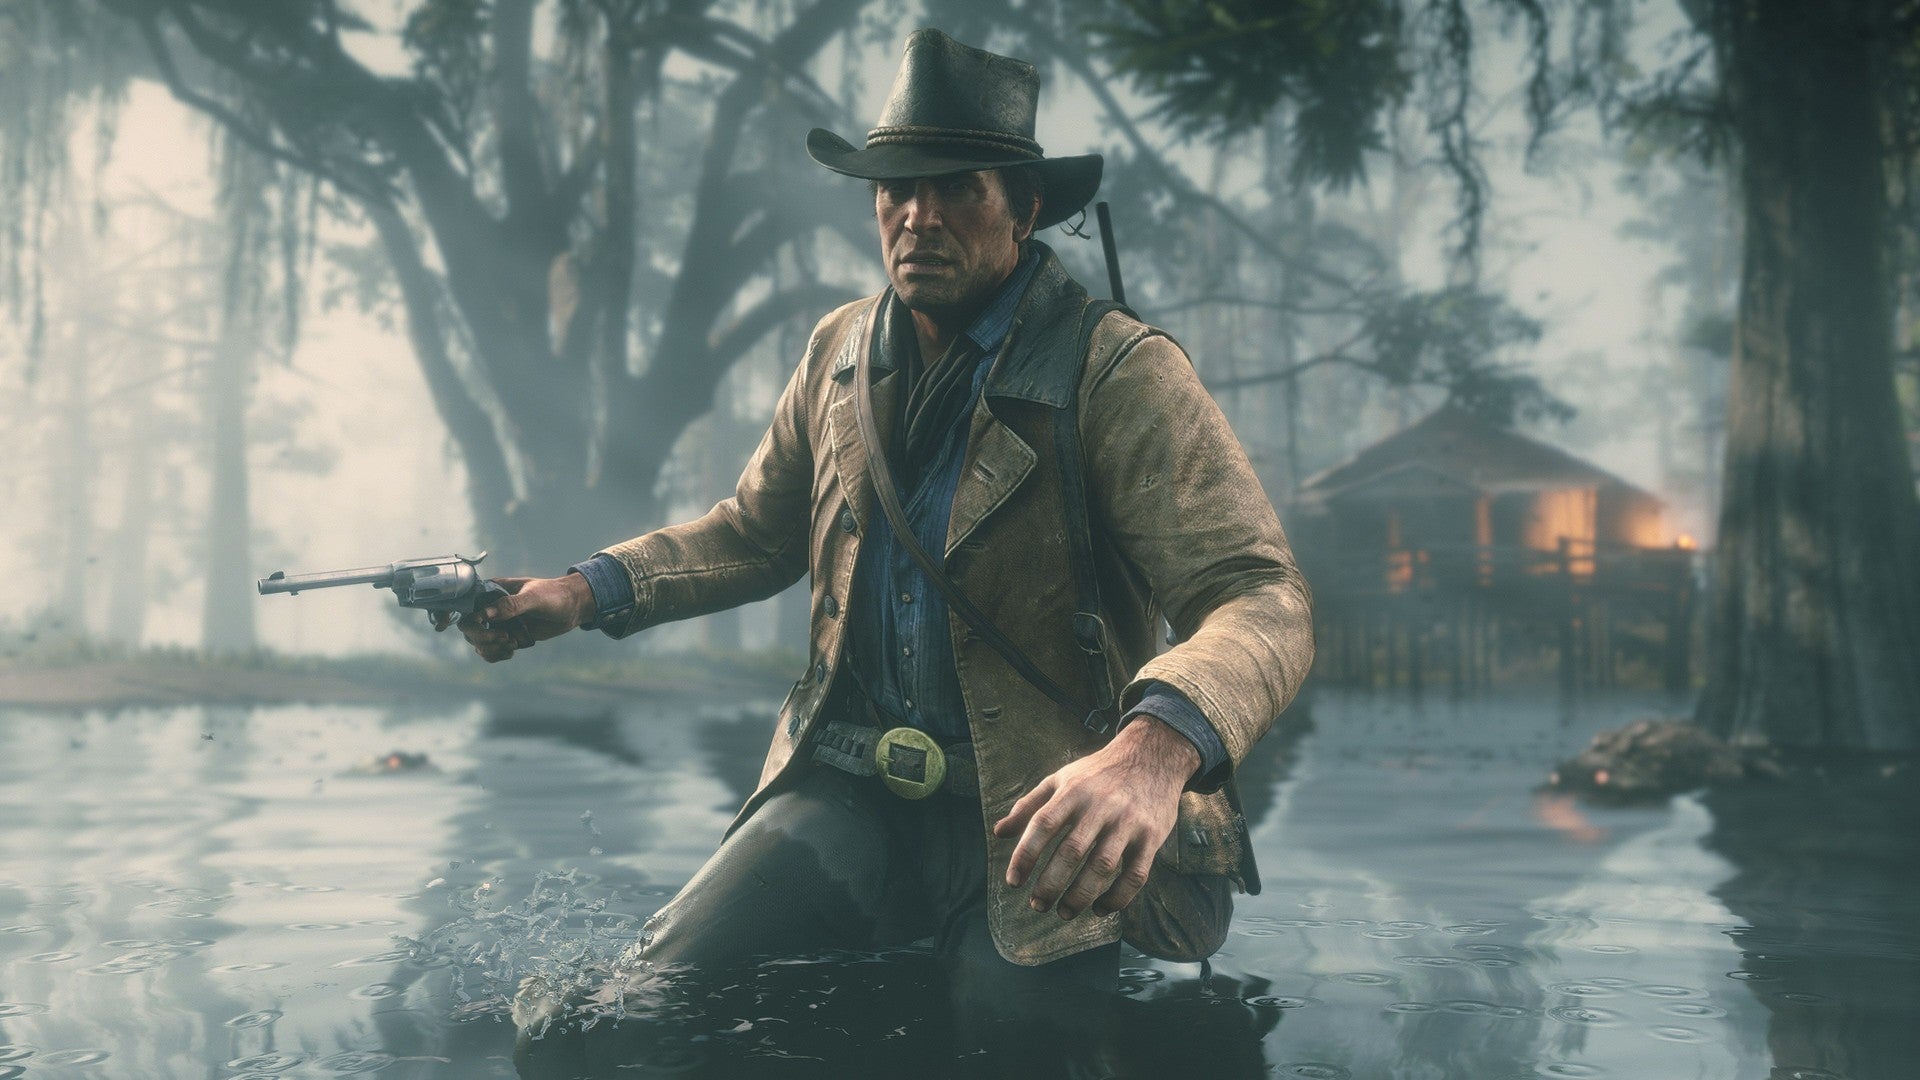 Red Dead Redemption 2 image showing Arthur Morgan wading through swampy water with trees and a lit hut in the background.